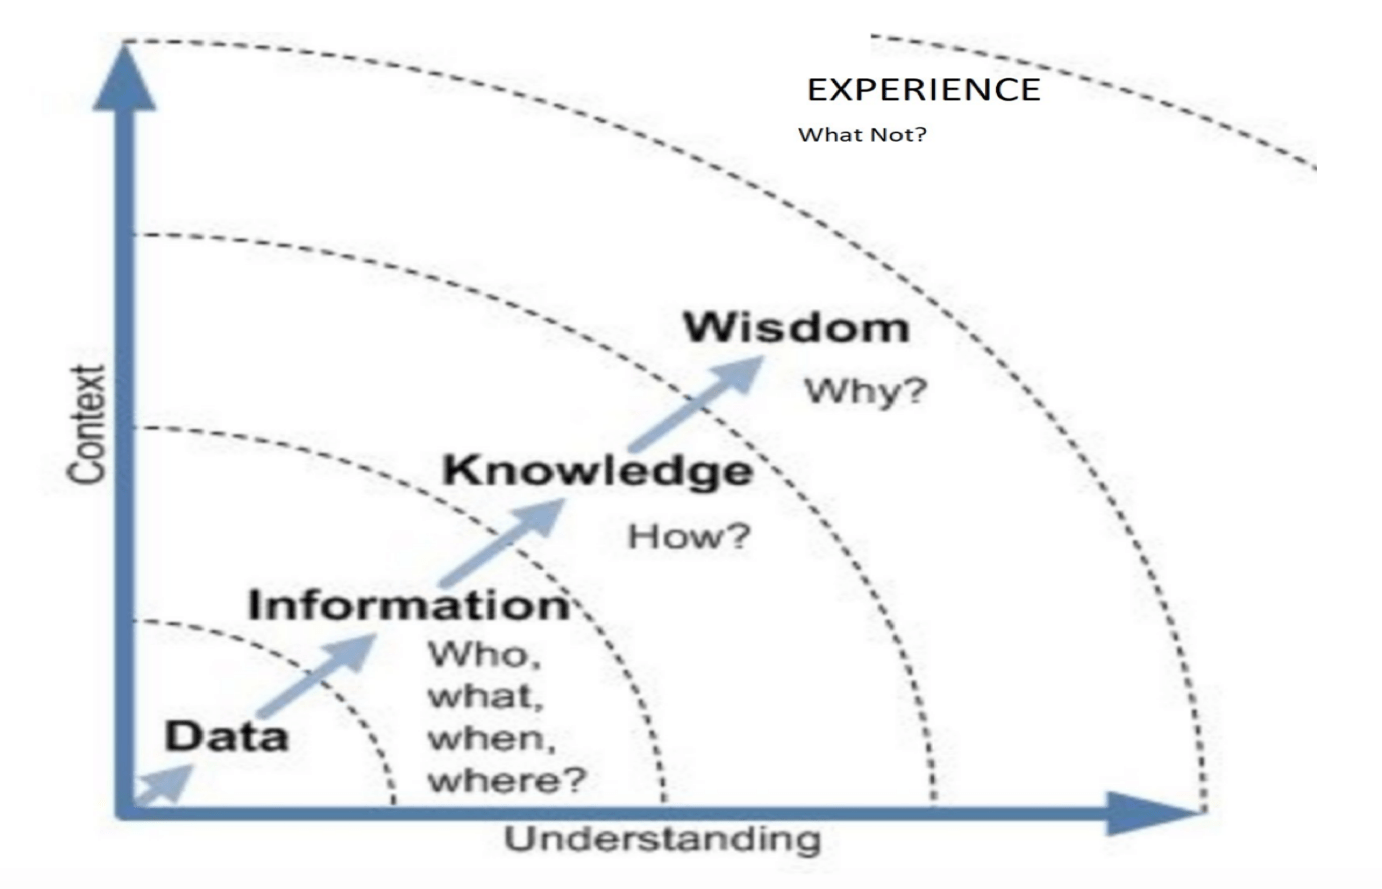 Wisdom_and_Experience_Graph.png